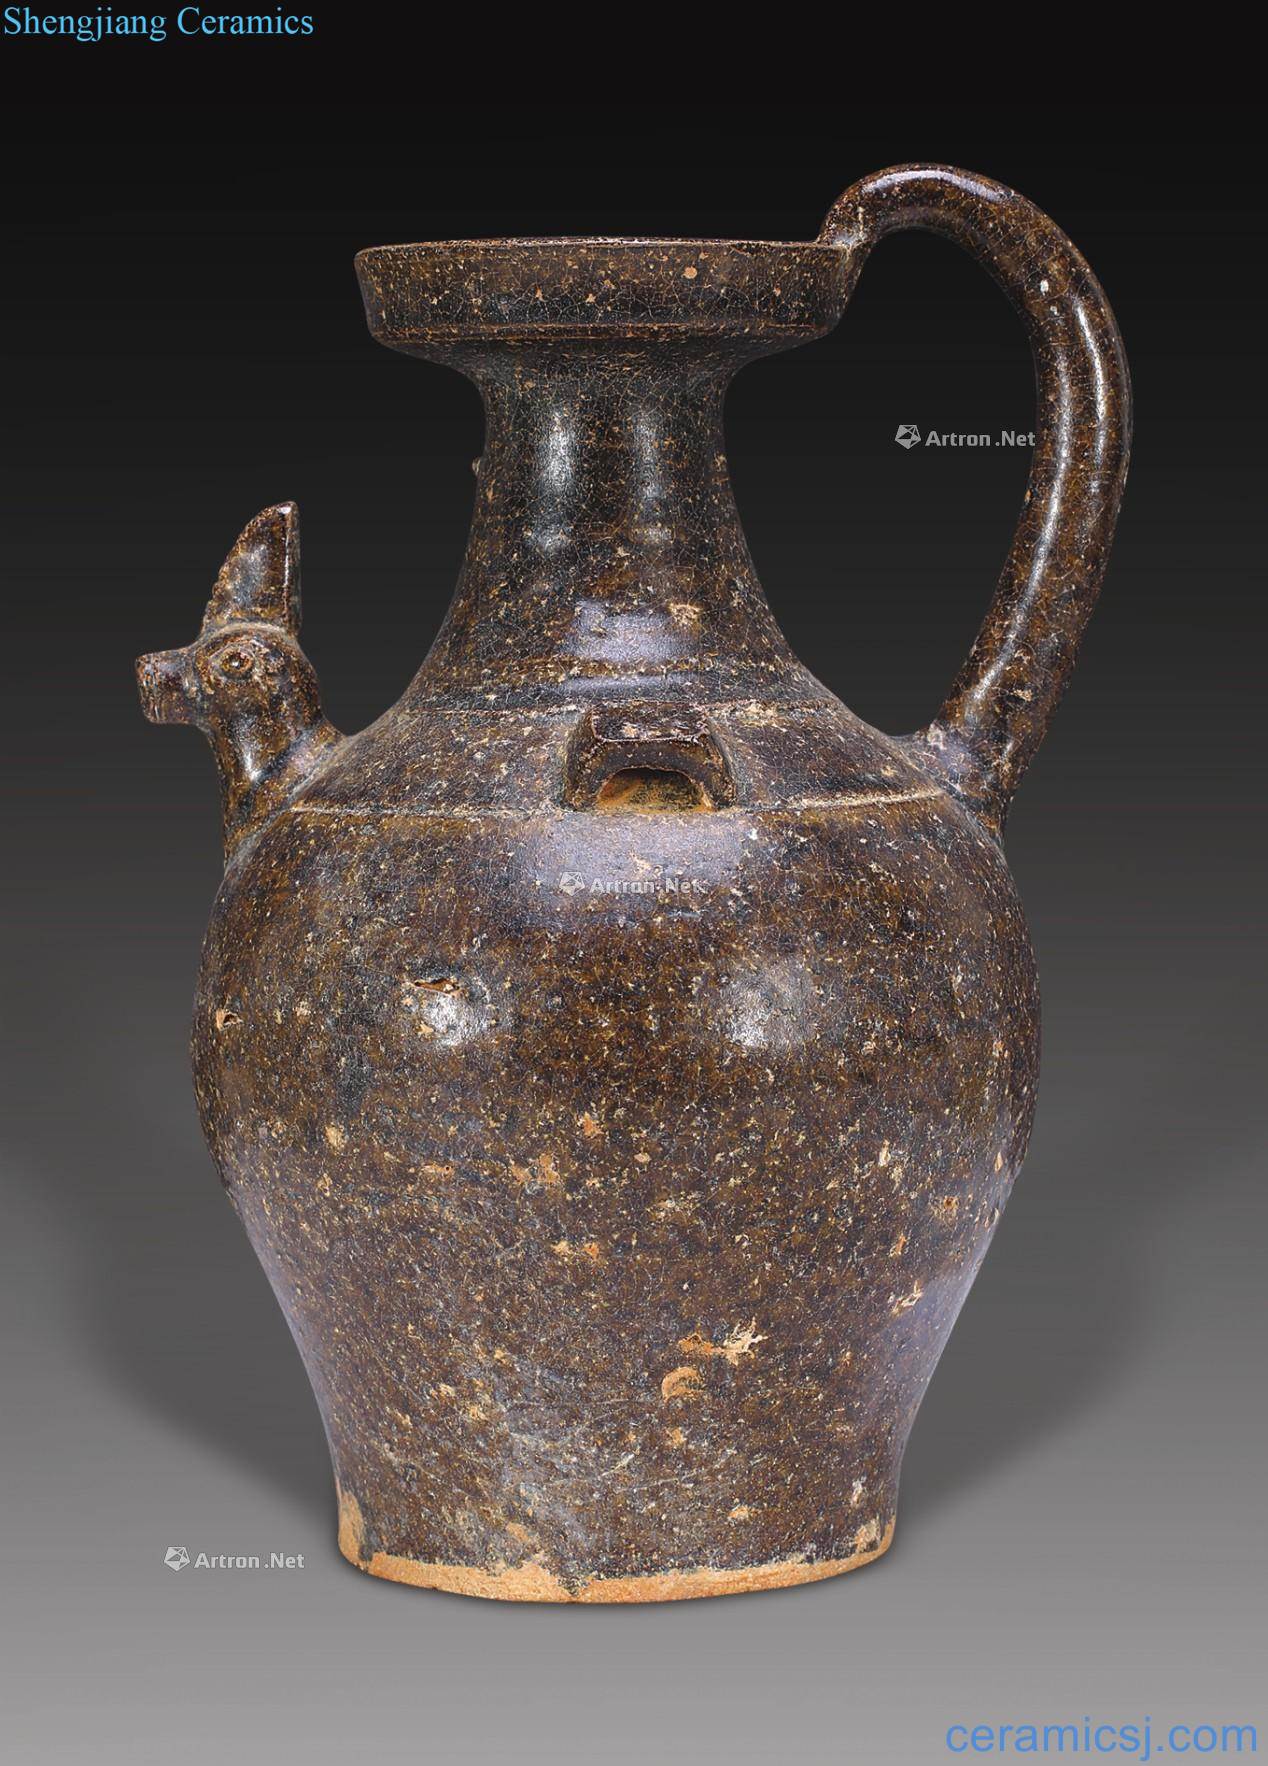 The kiln tail of the ewer